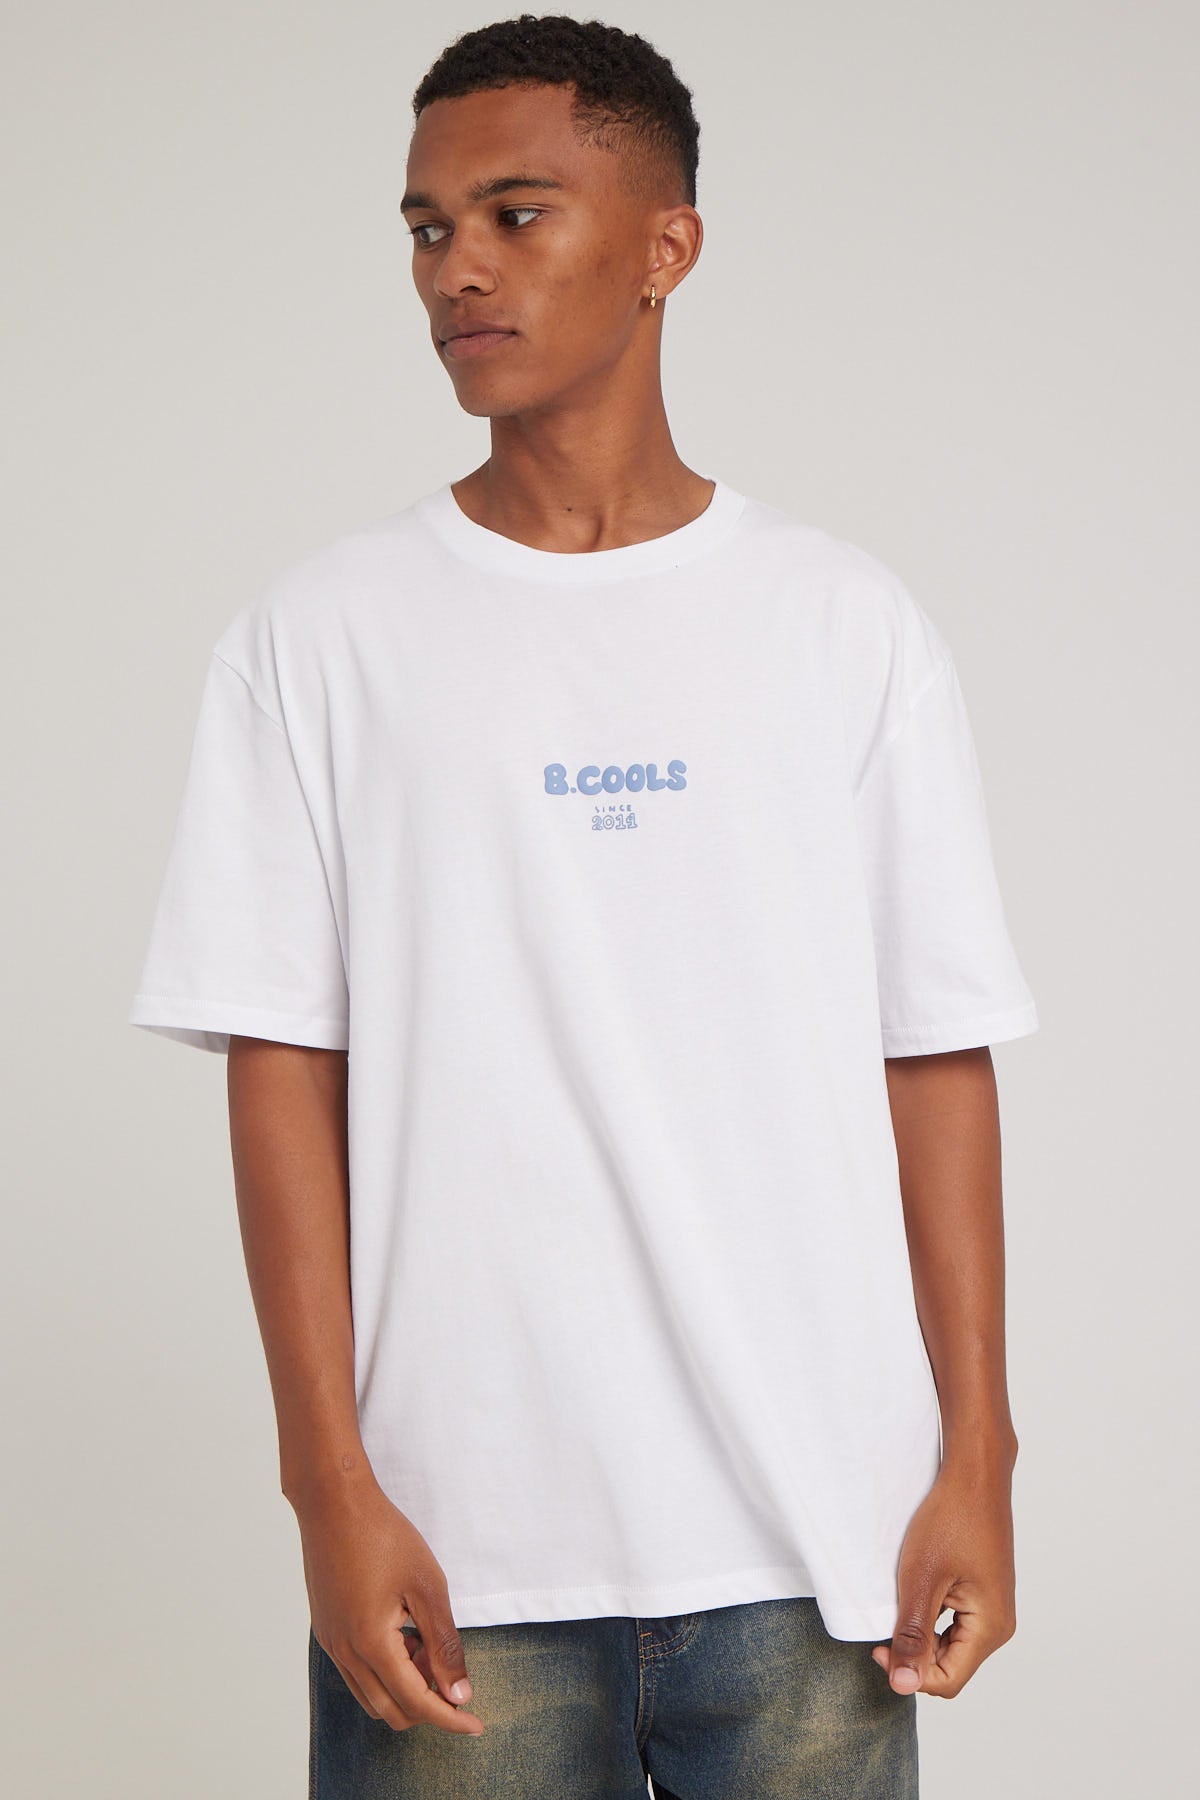 Barney Cools Lads Tee White